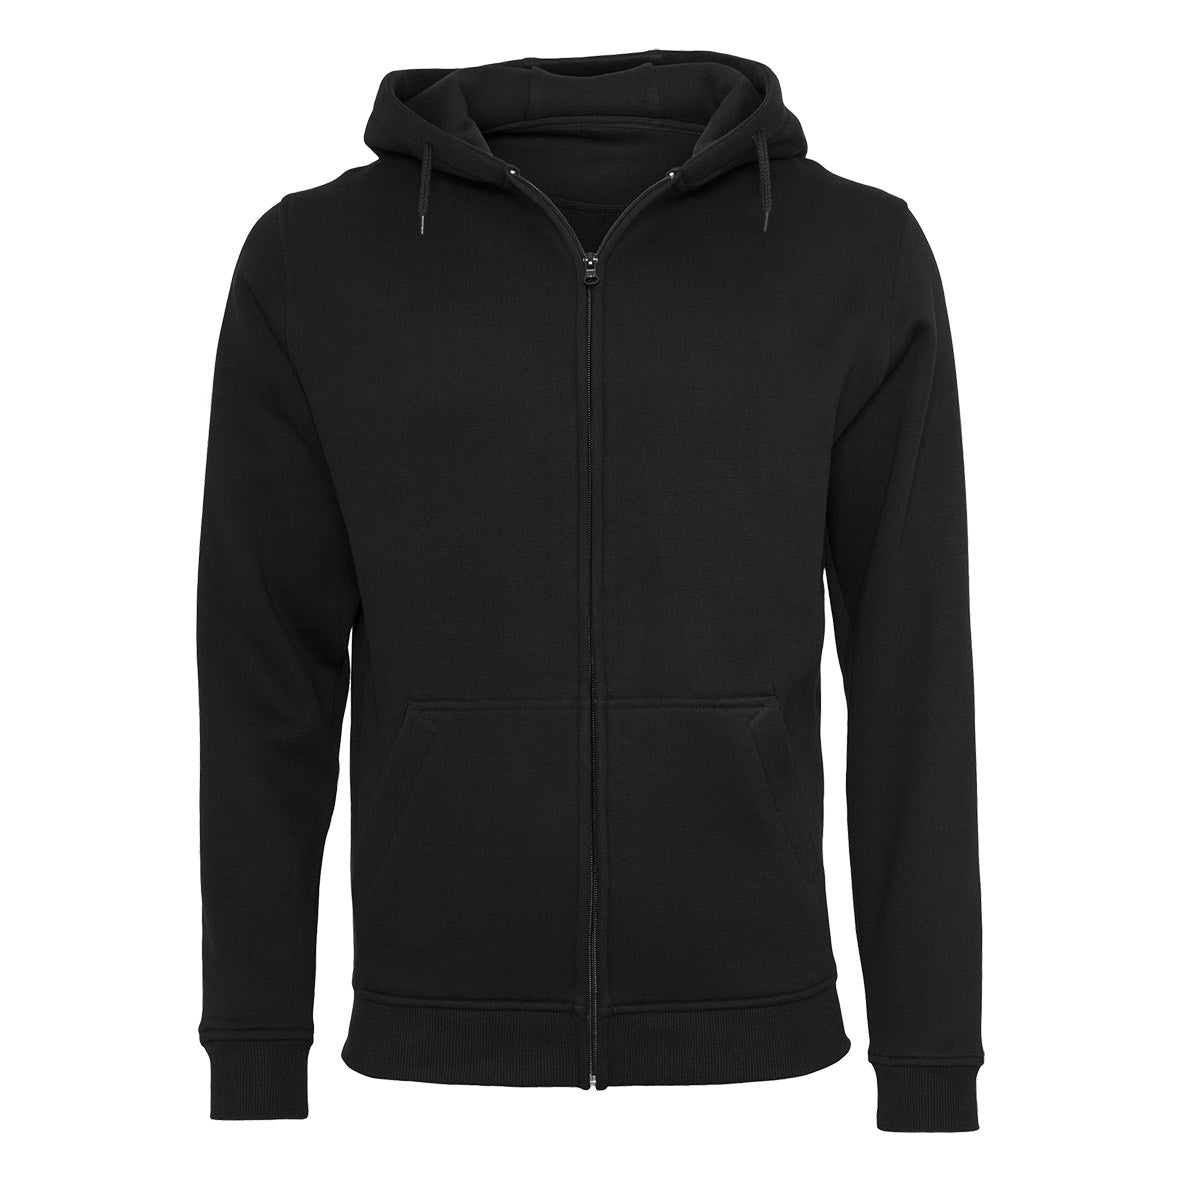 Steven Rhodes - Catch of the Day - Zip-Hoodie | yvolve Shop